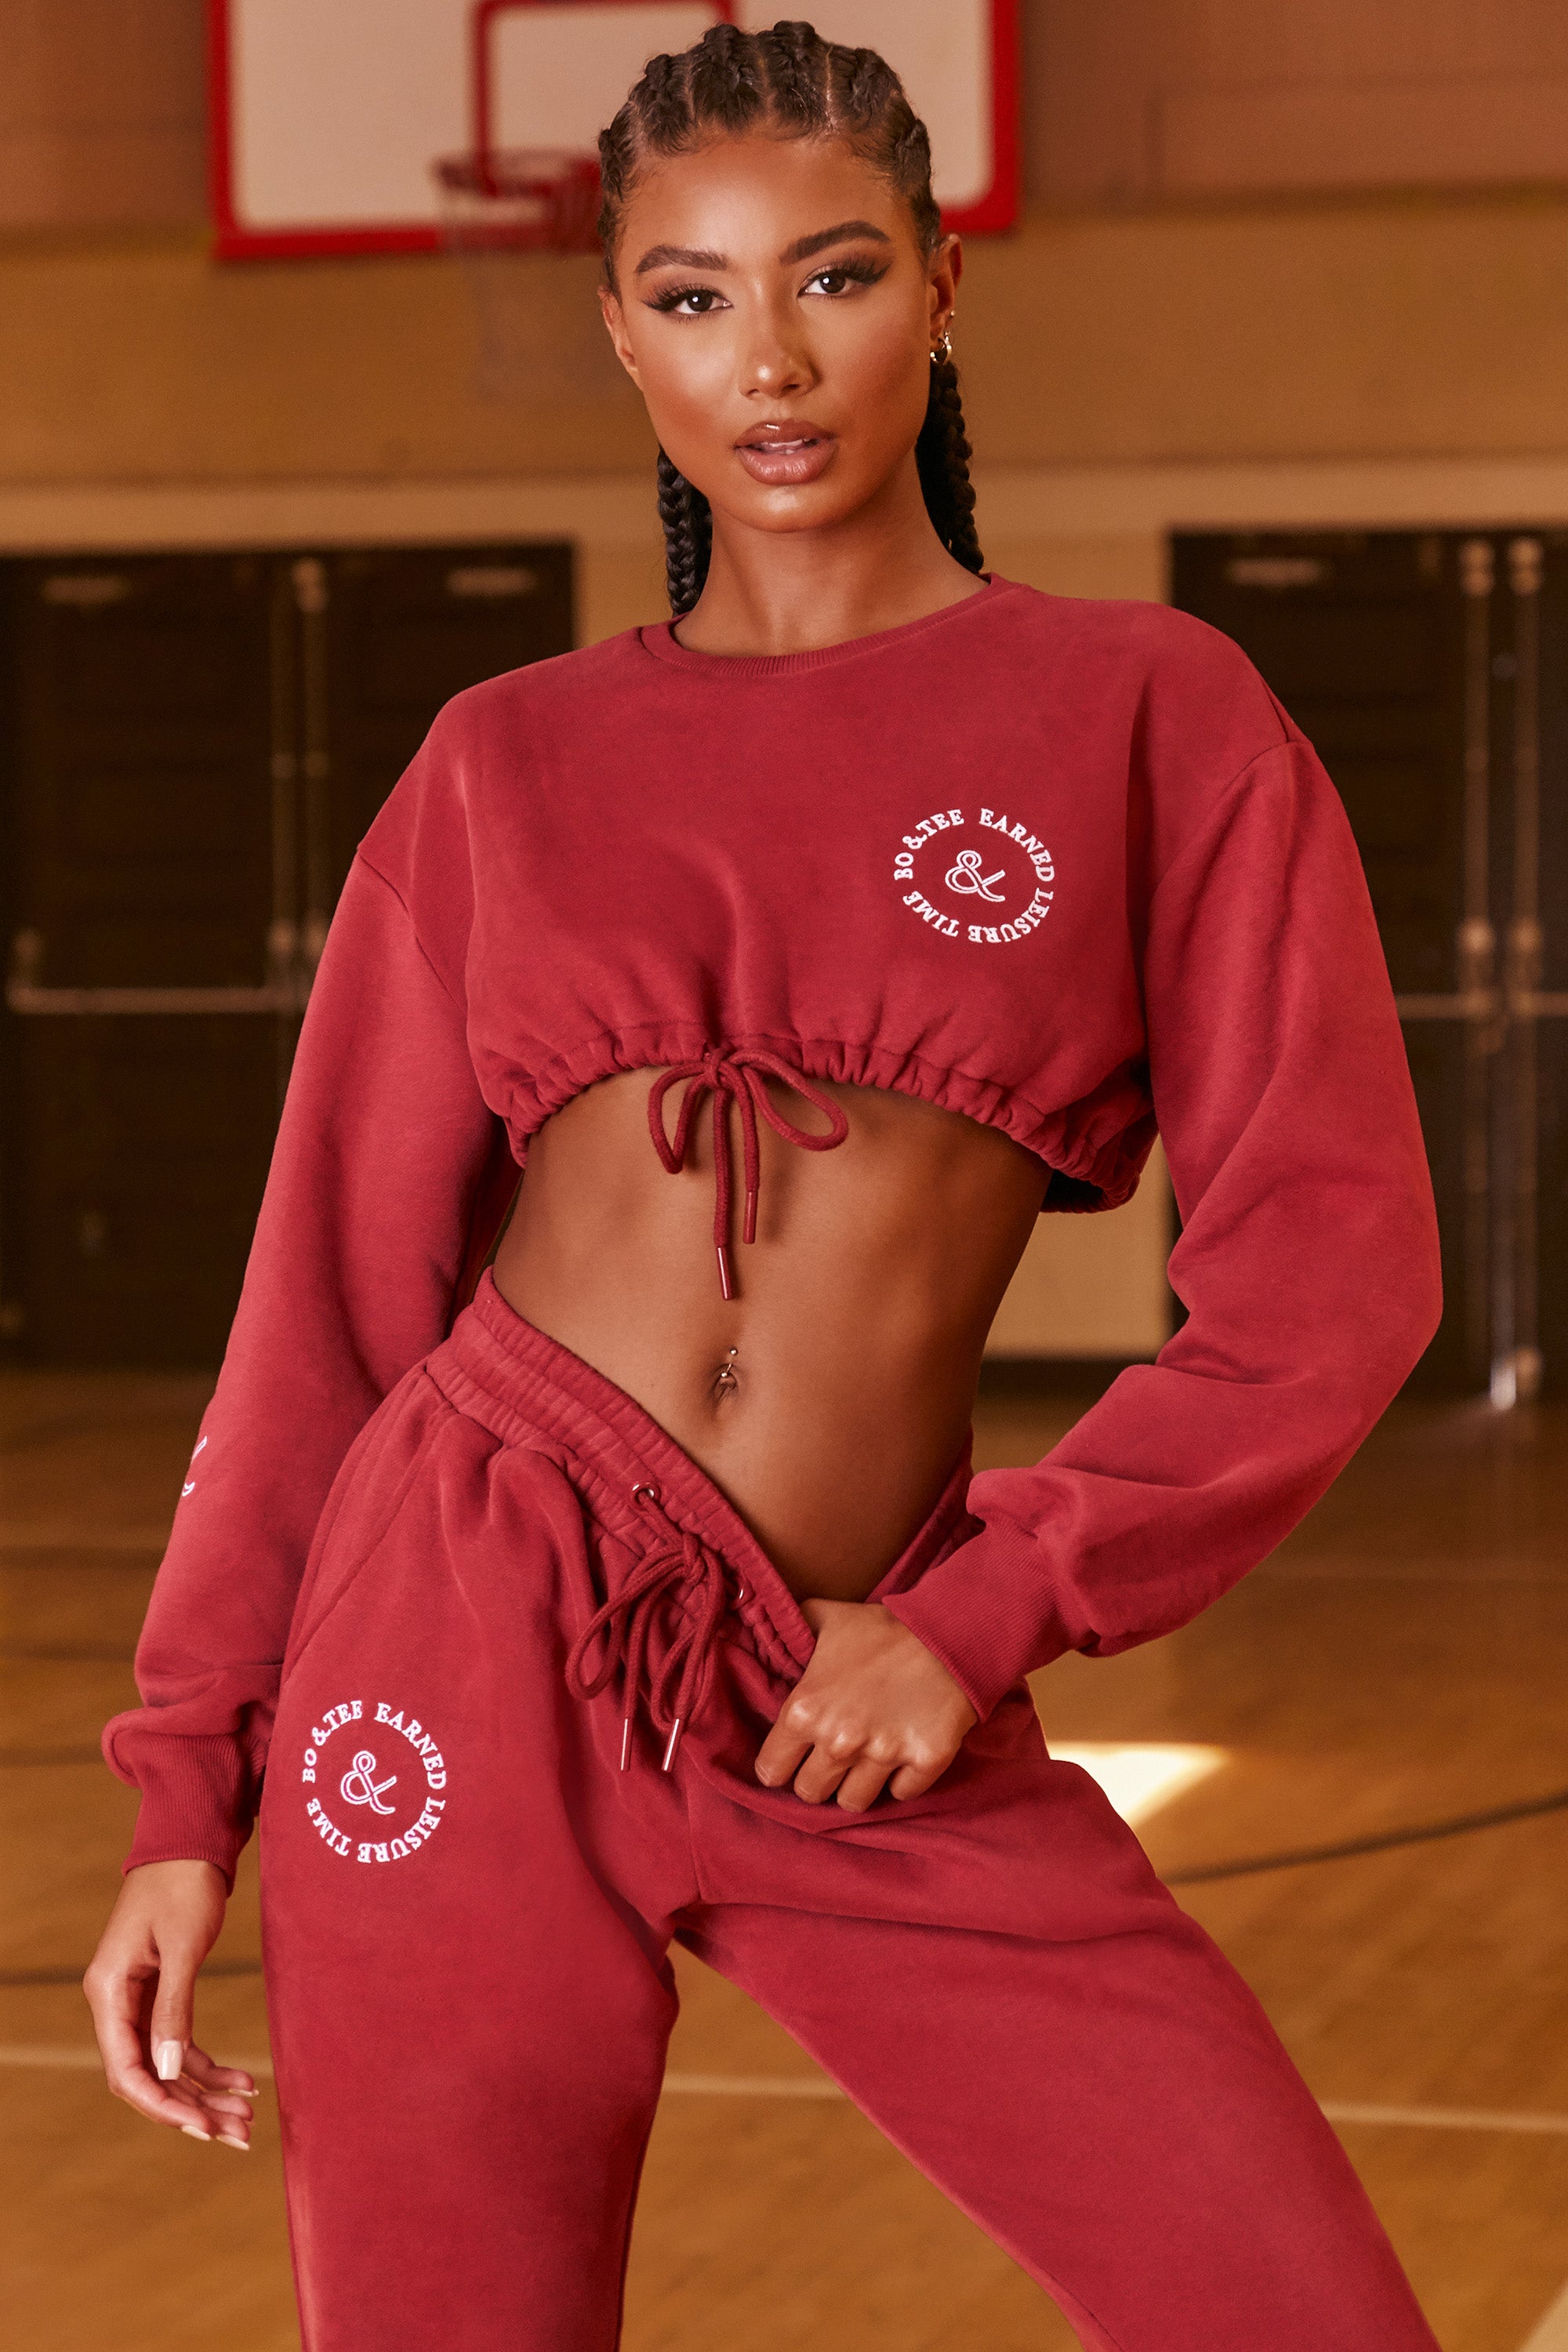 Cropped Hoodies for Women, Cropped Gym Hoodies